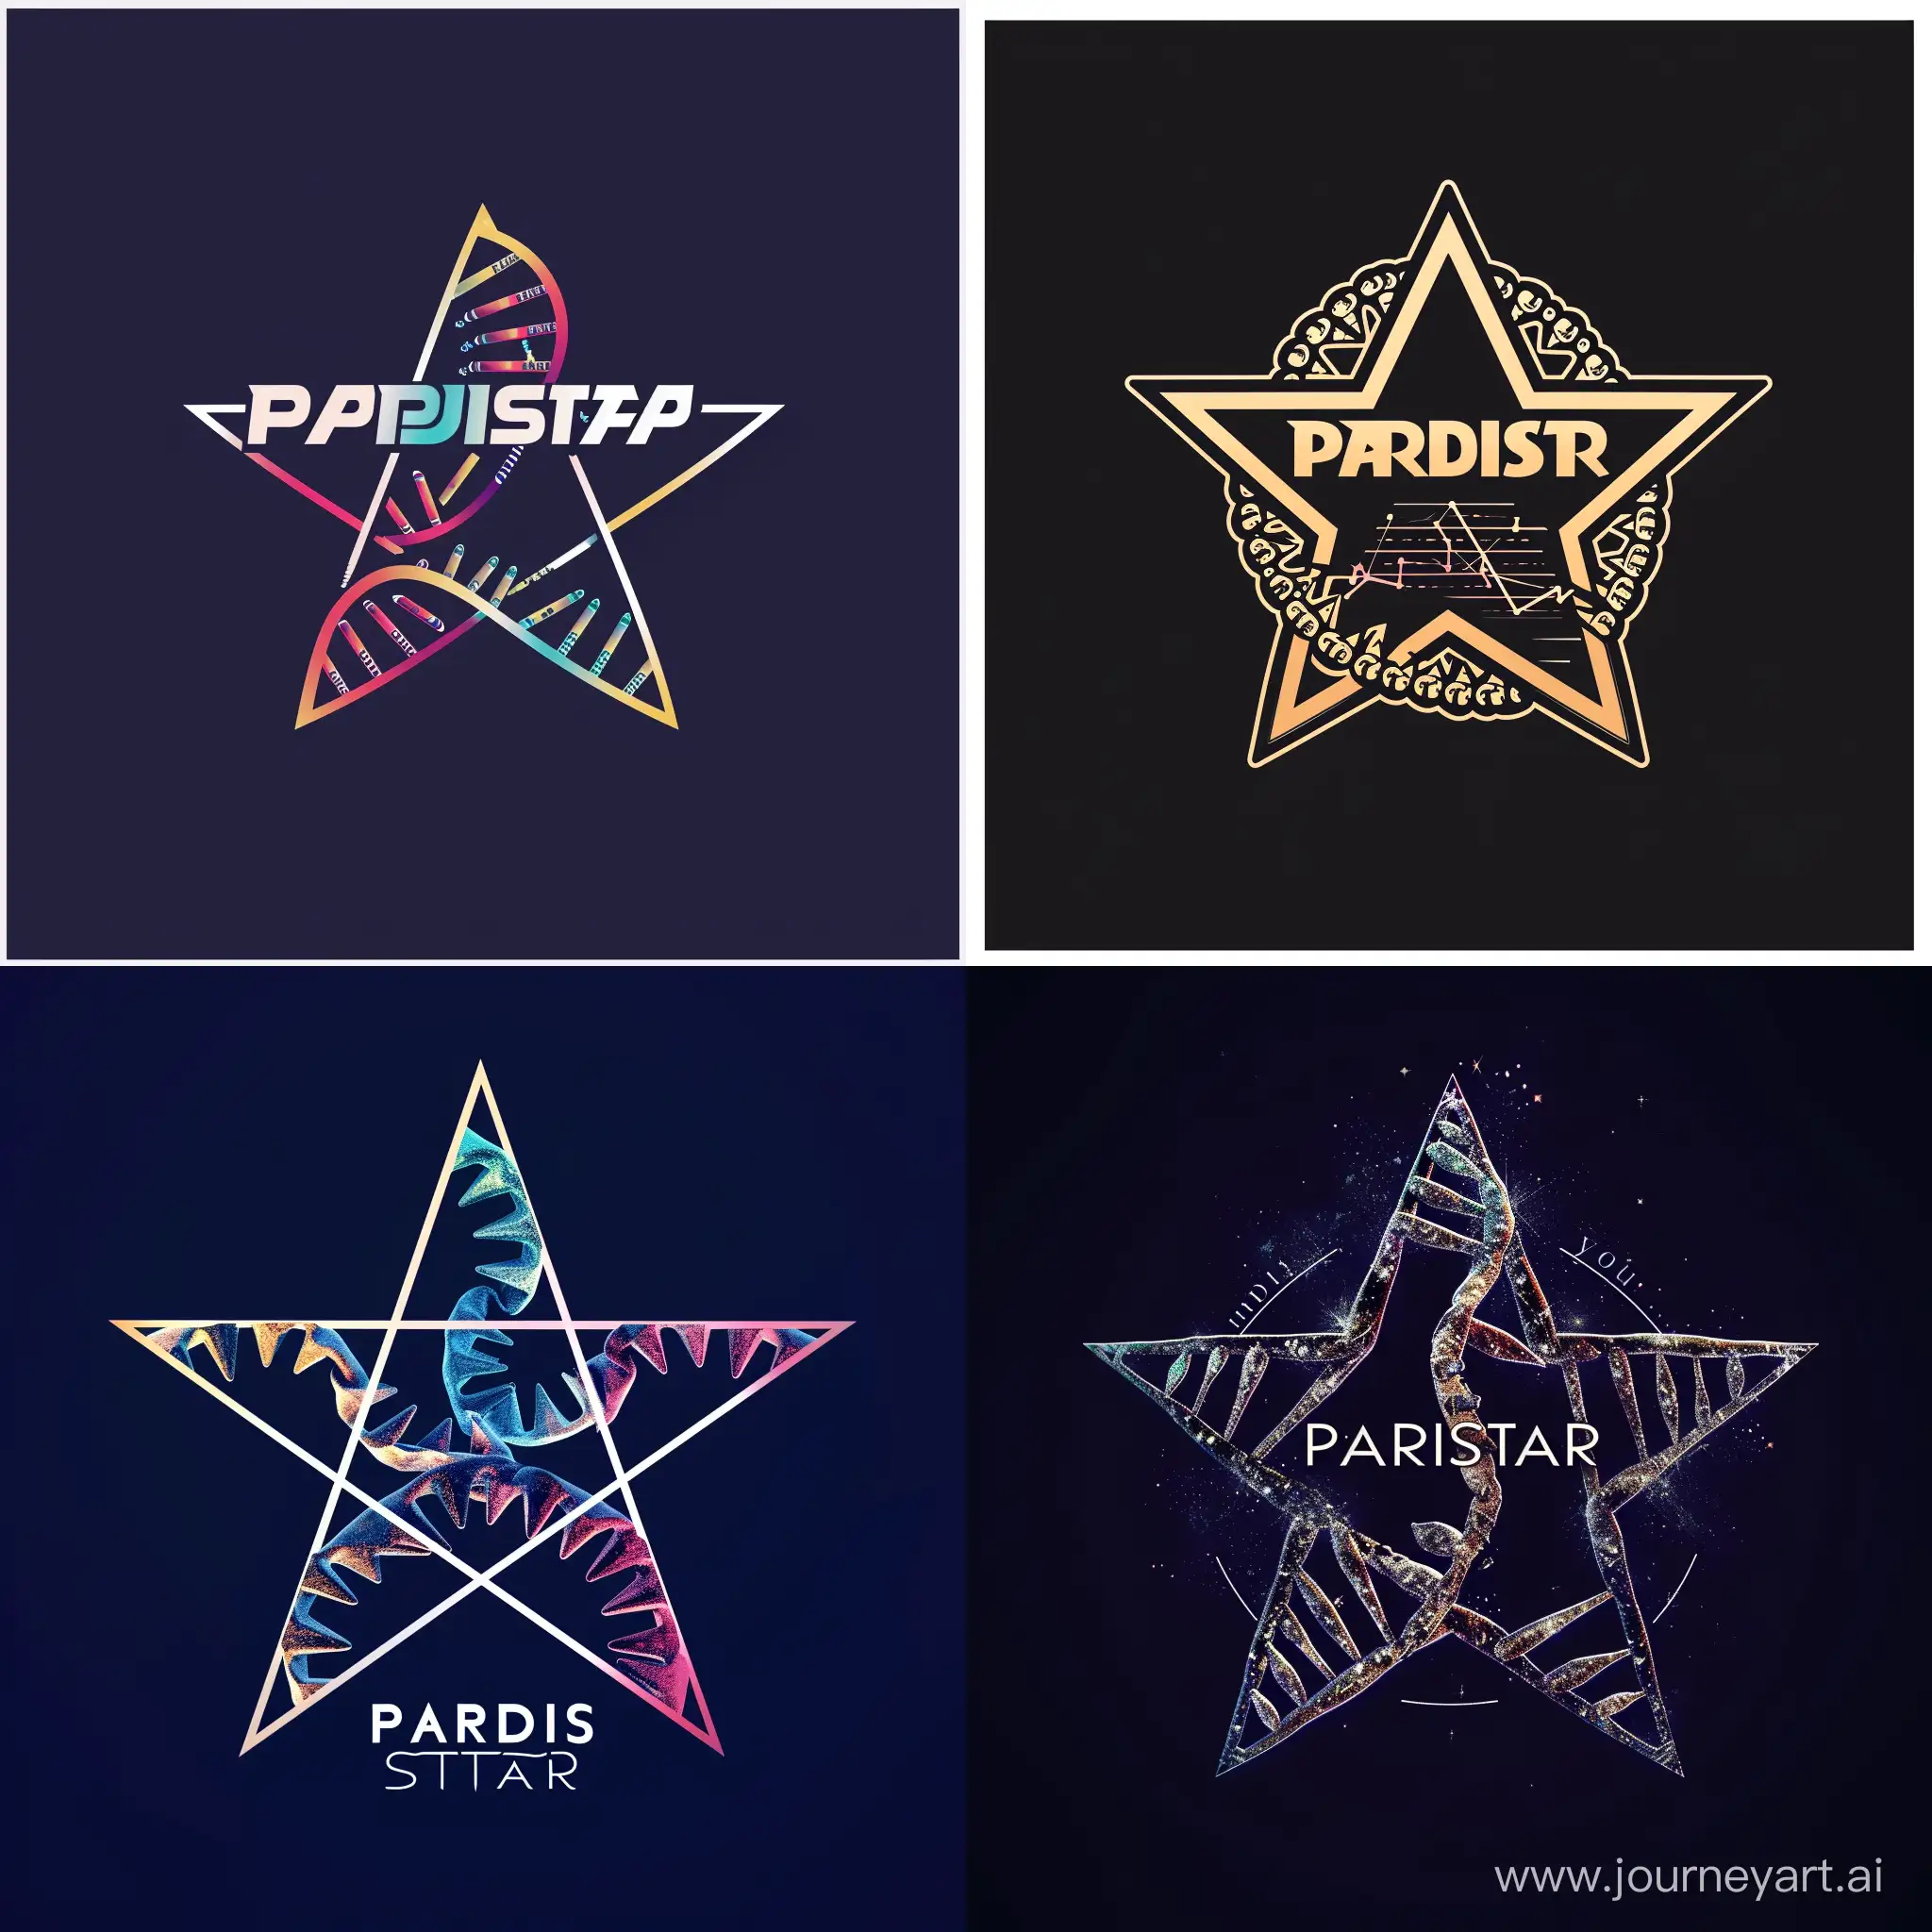 Pardisstar-Logo-with-DNA-Double-Helix-in-Star-Shape